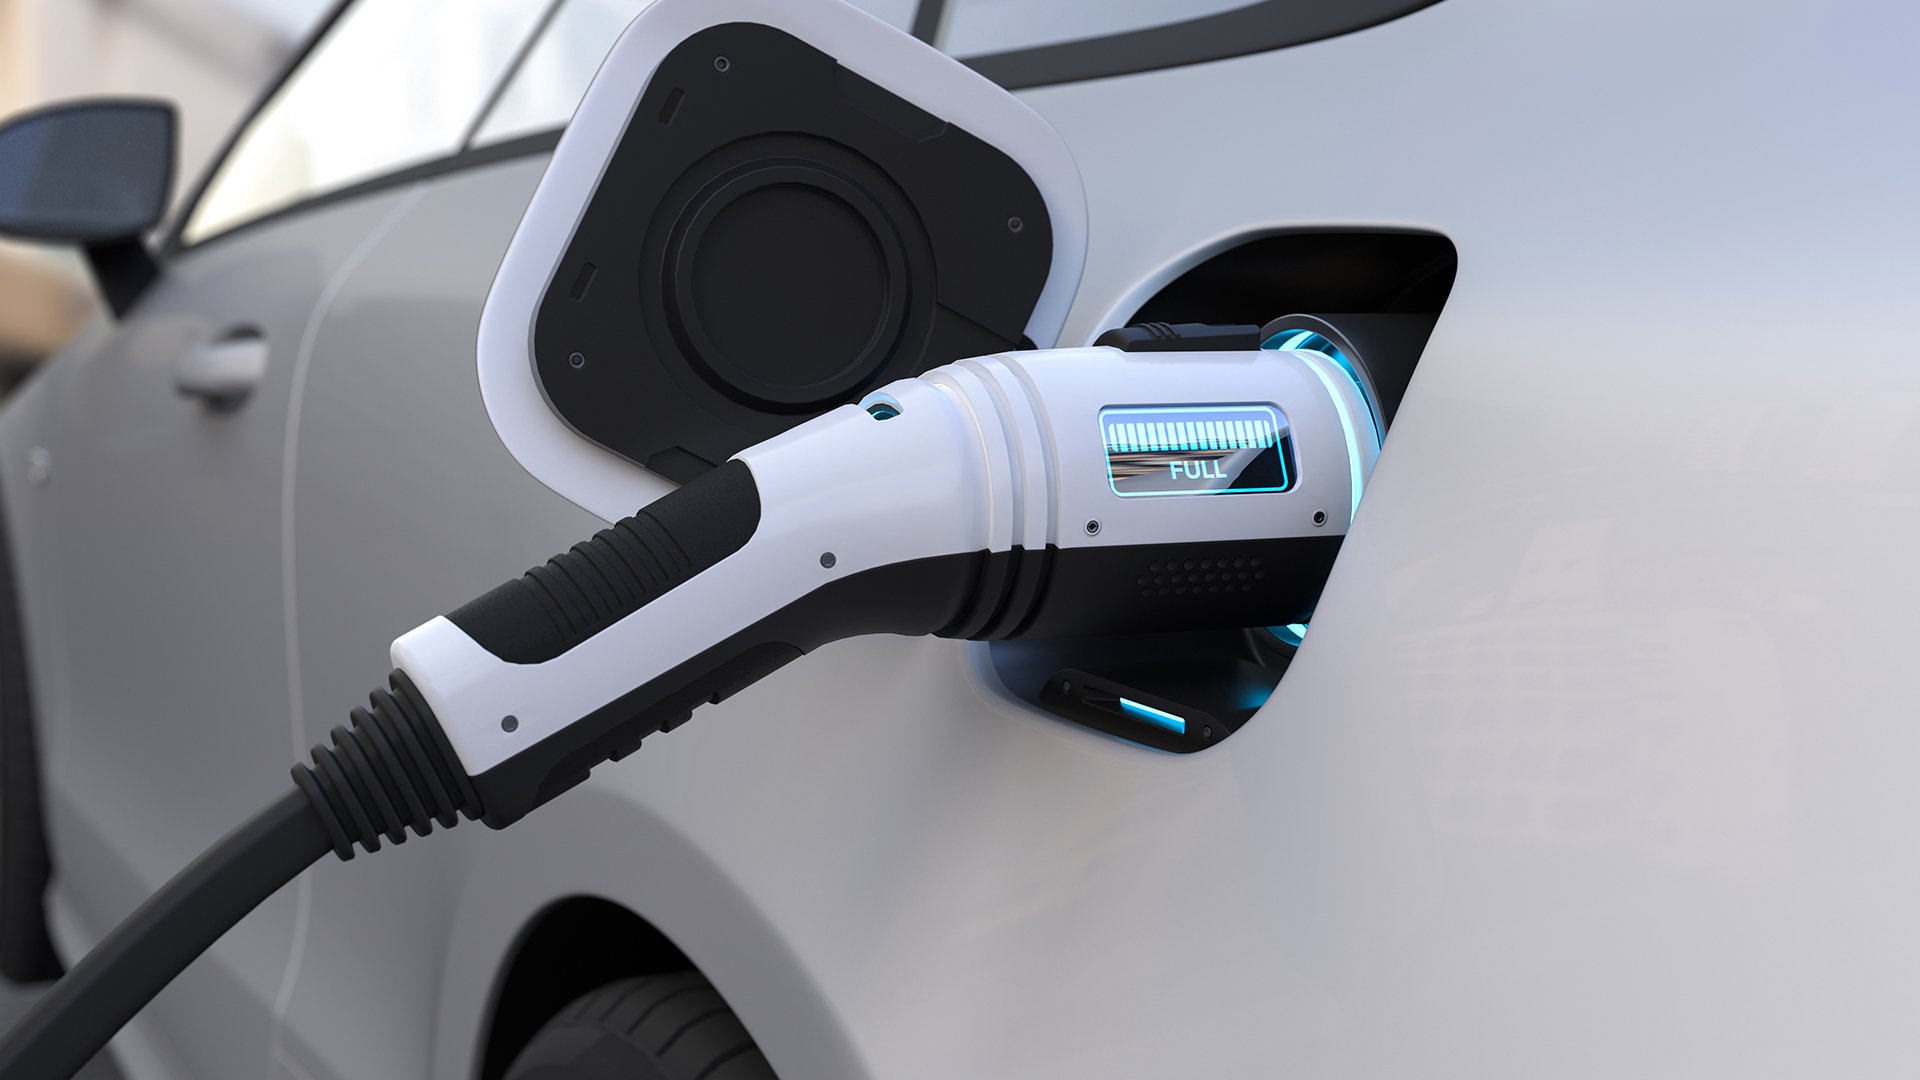 An electric vehicle charging cable plugged into a vehicle,  the socket is equipped with a LED screen that indicates the current status of the charge. In this case, the vehicle's battery is fully charged. 